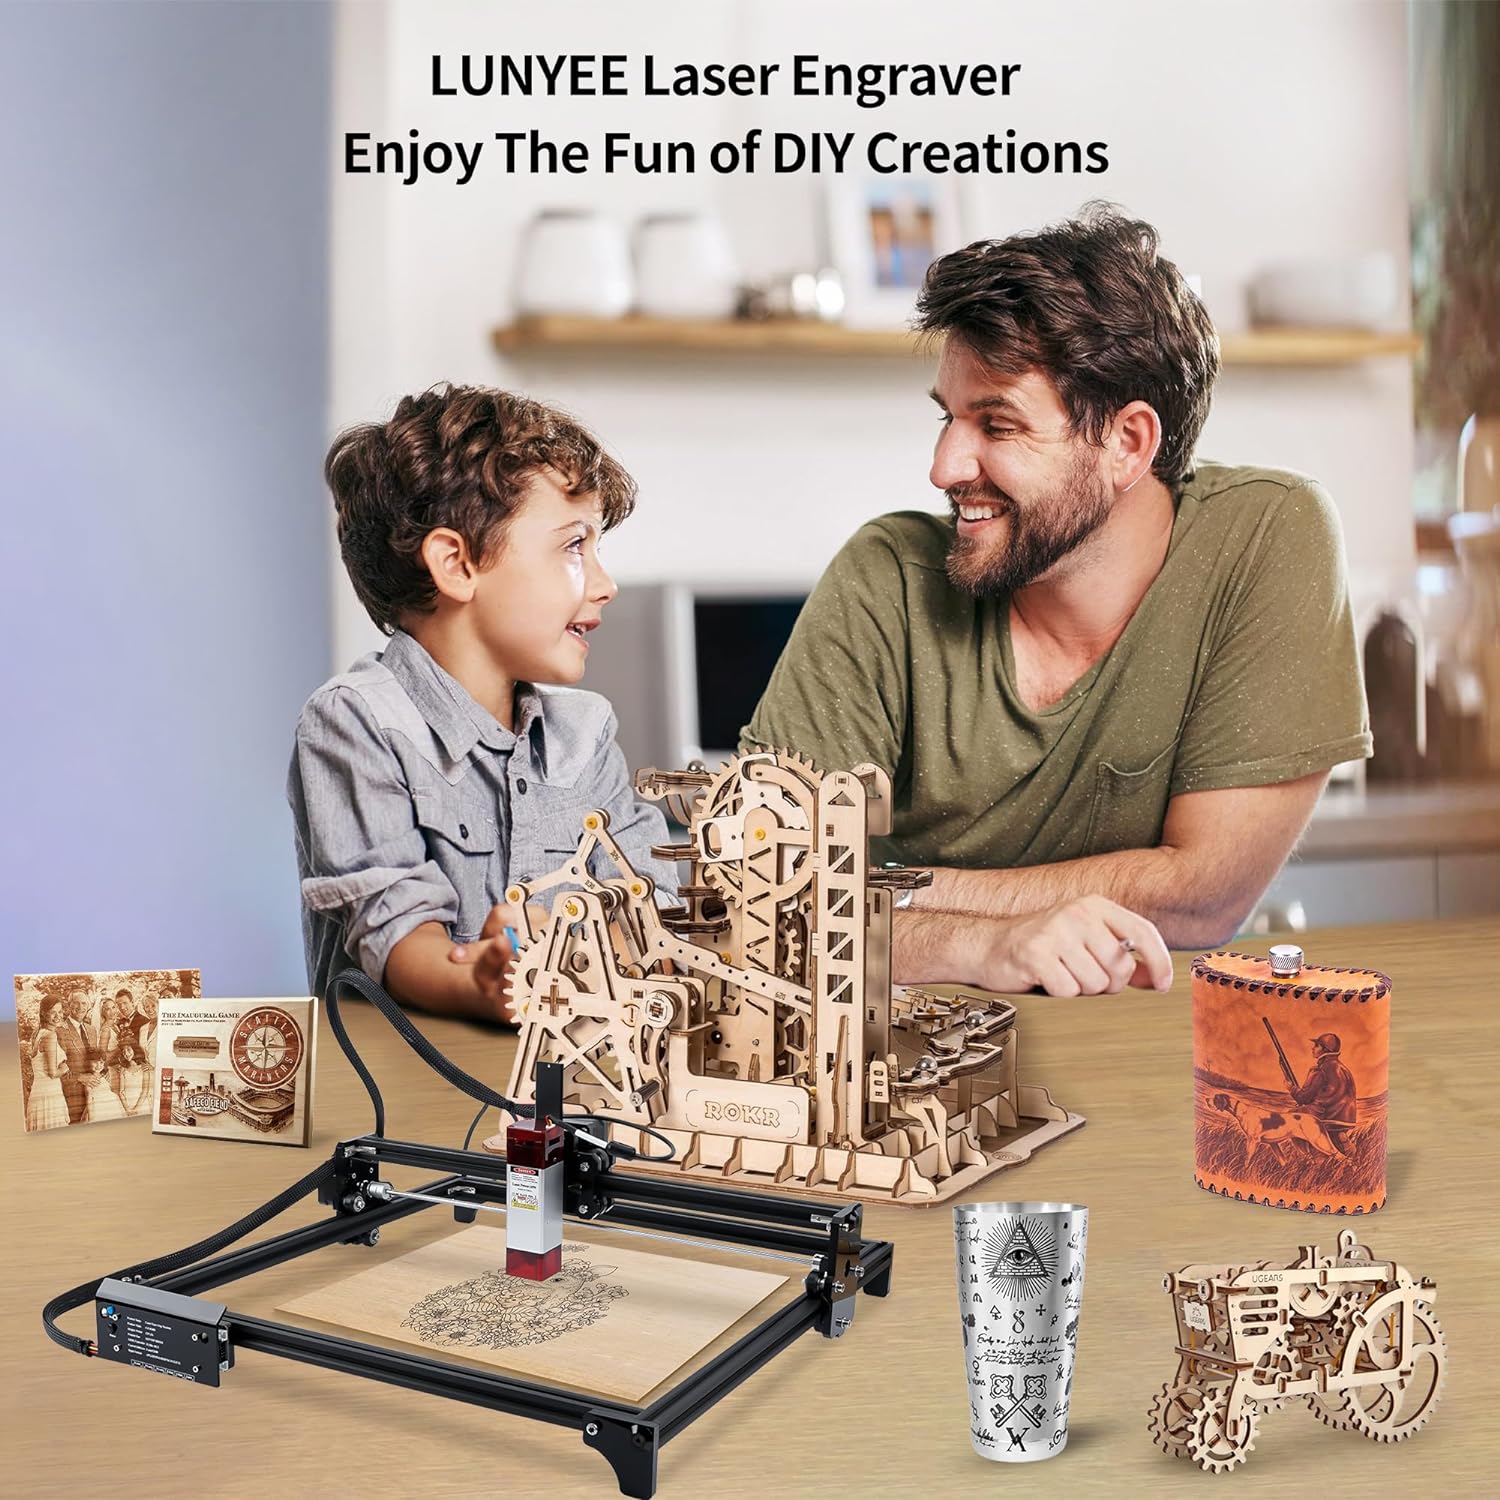 LUNYEE Laser Engraver, 5.5W-10W Compressed Fixed Focus Laser, GRBL Controller Support